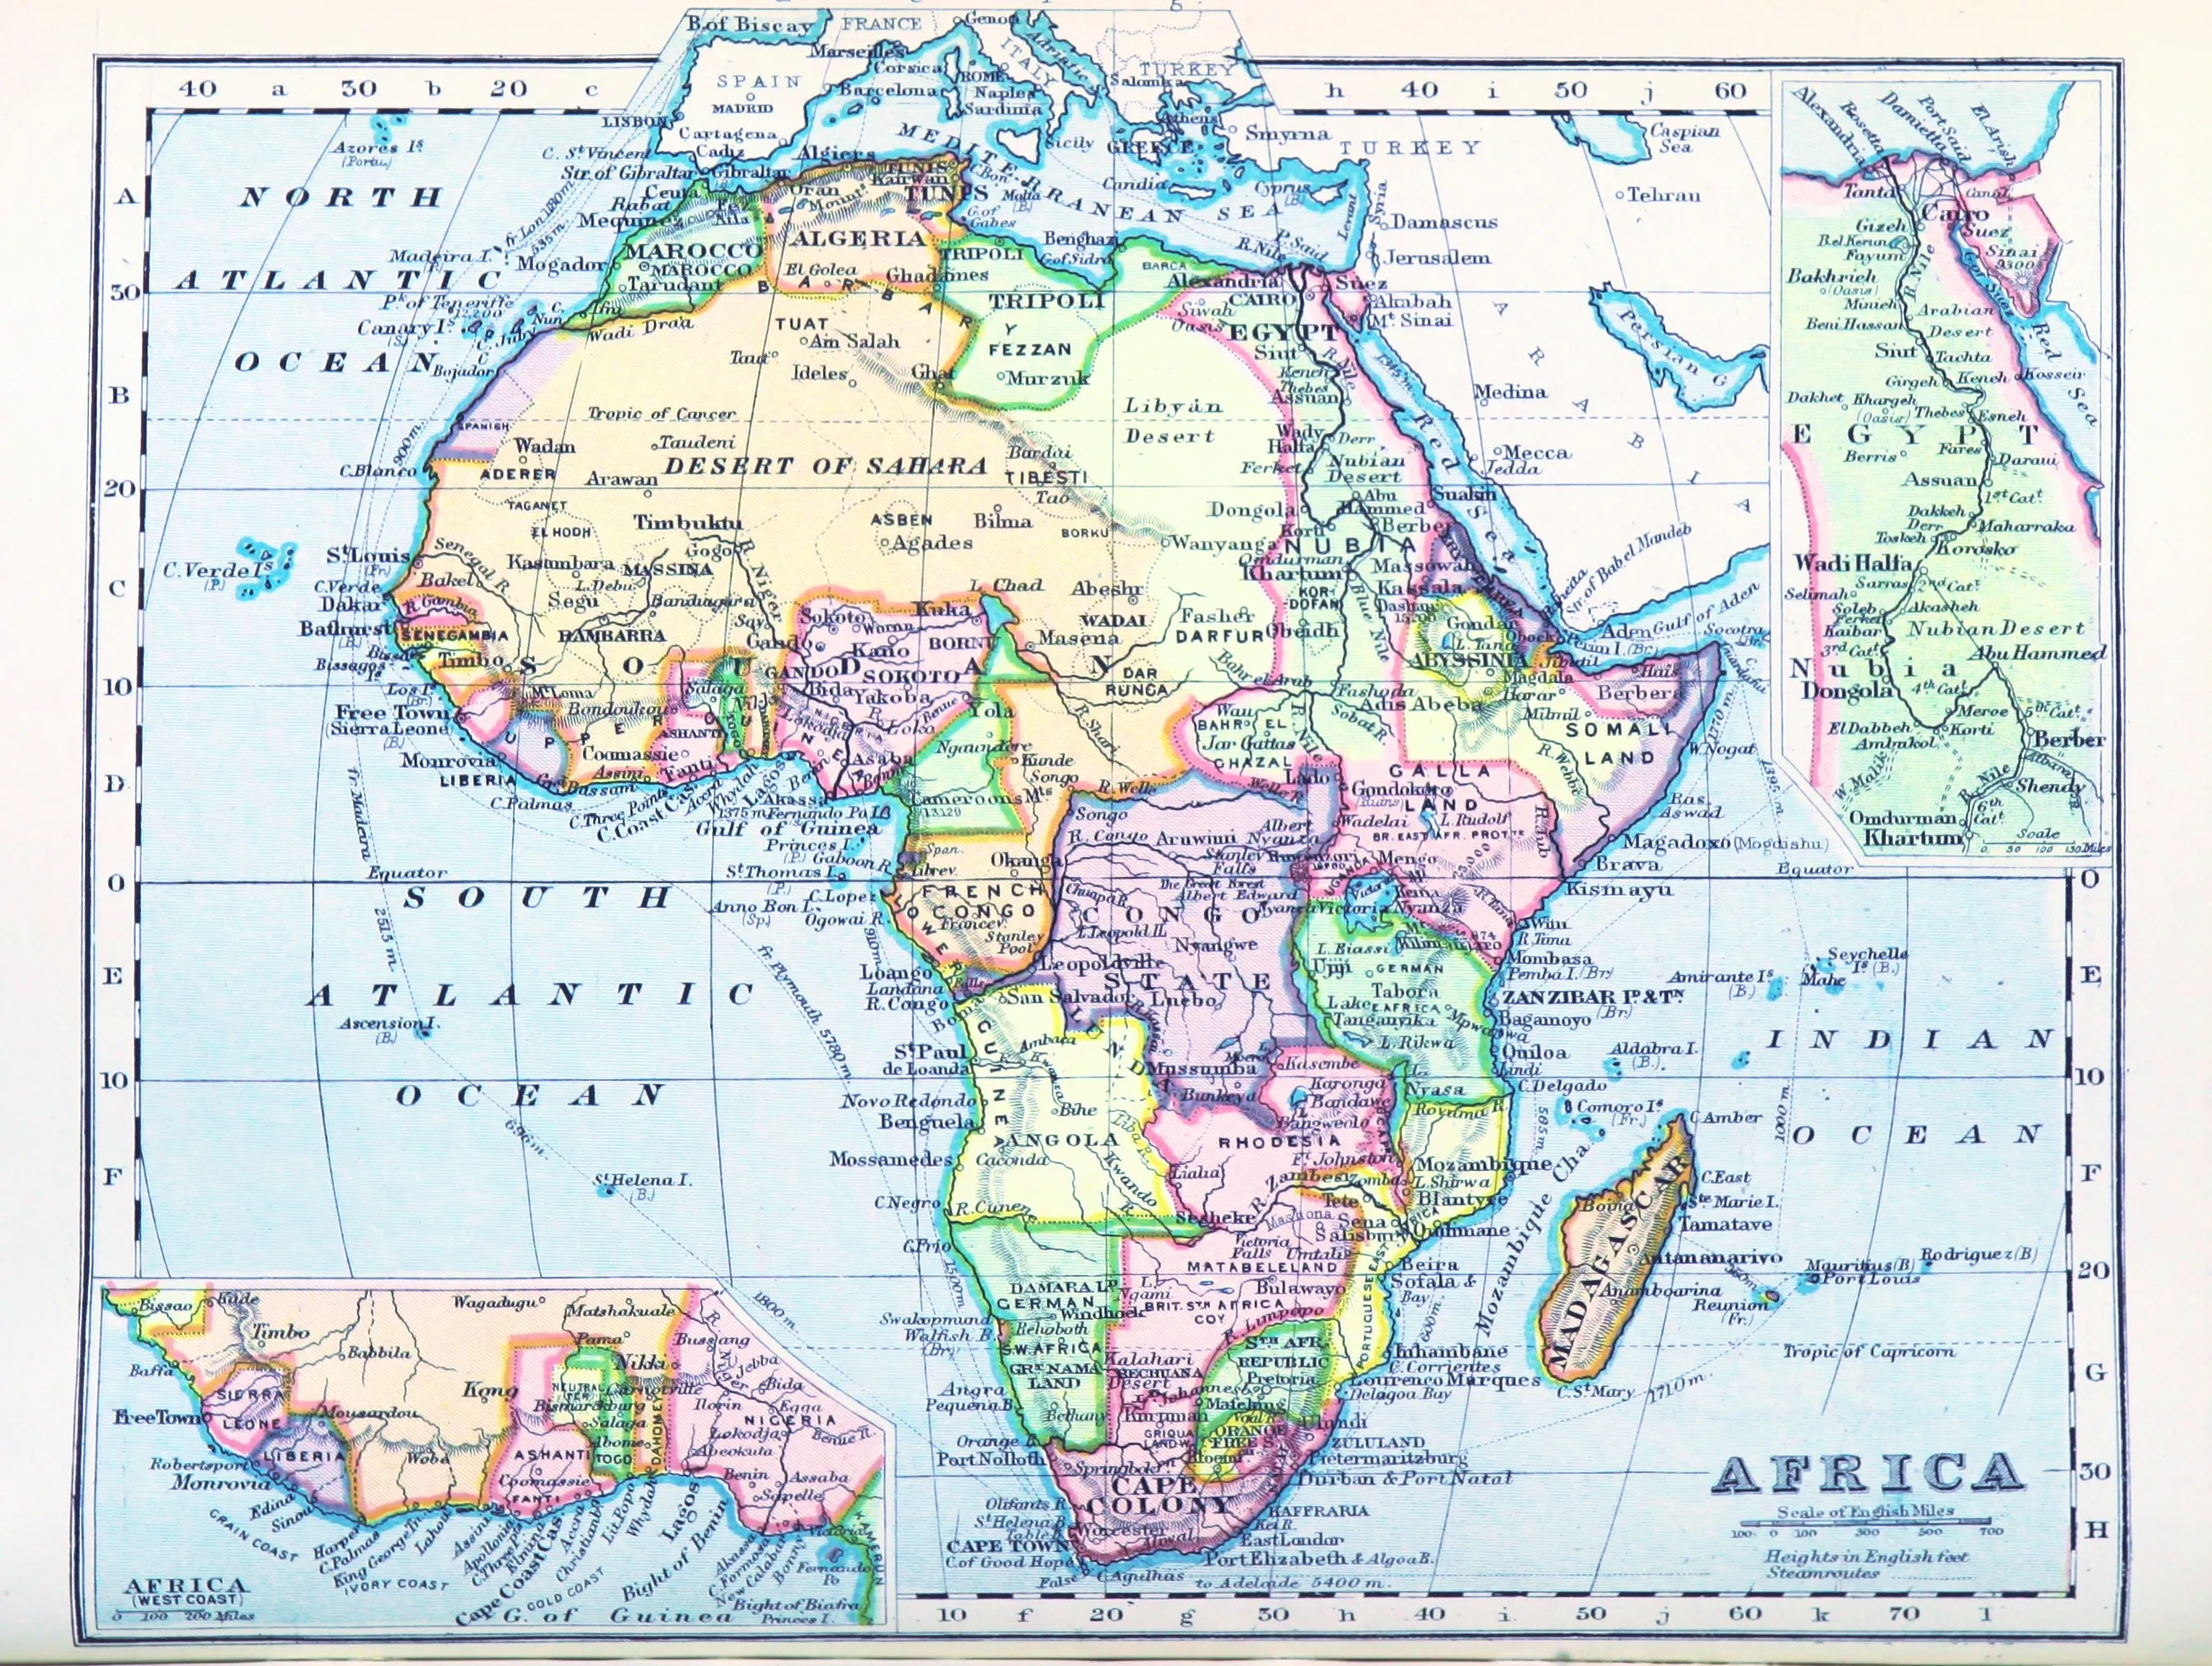 A British map of Africa published in 1899